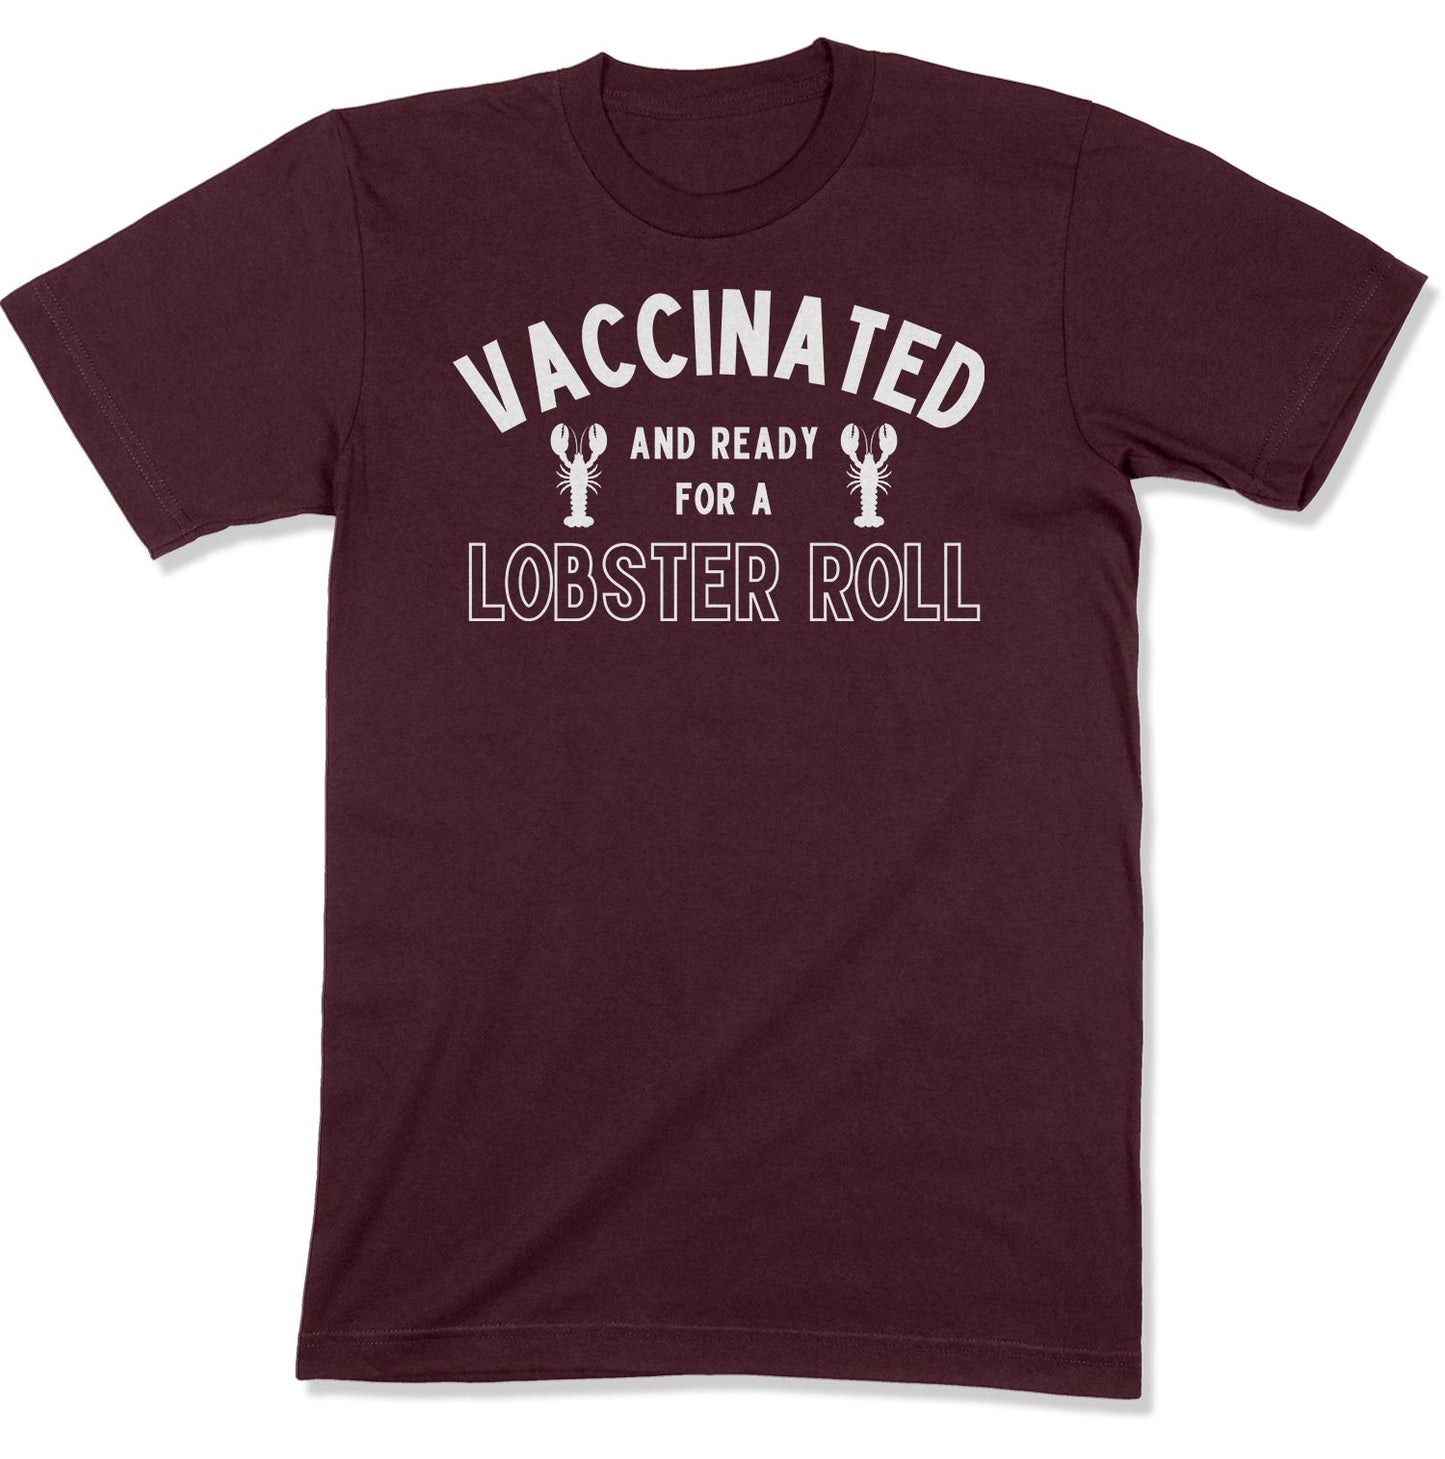 Vaccinated and Ready for a Lobster Roll Unisex T-Shirt-East Coast AF Apparel